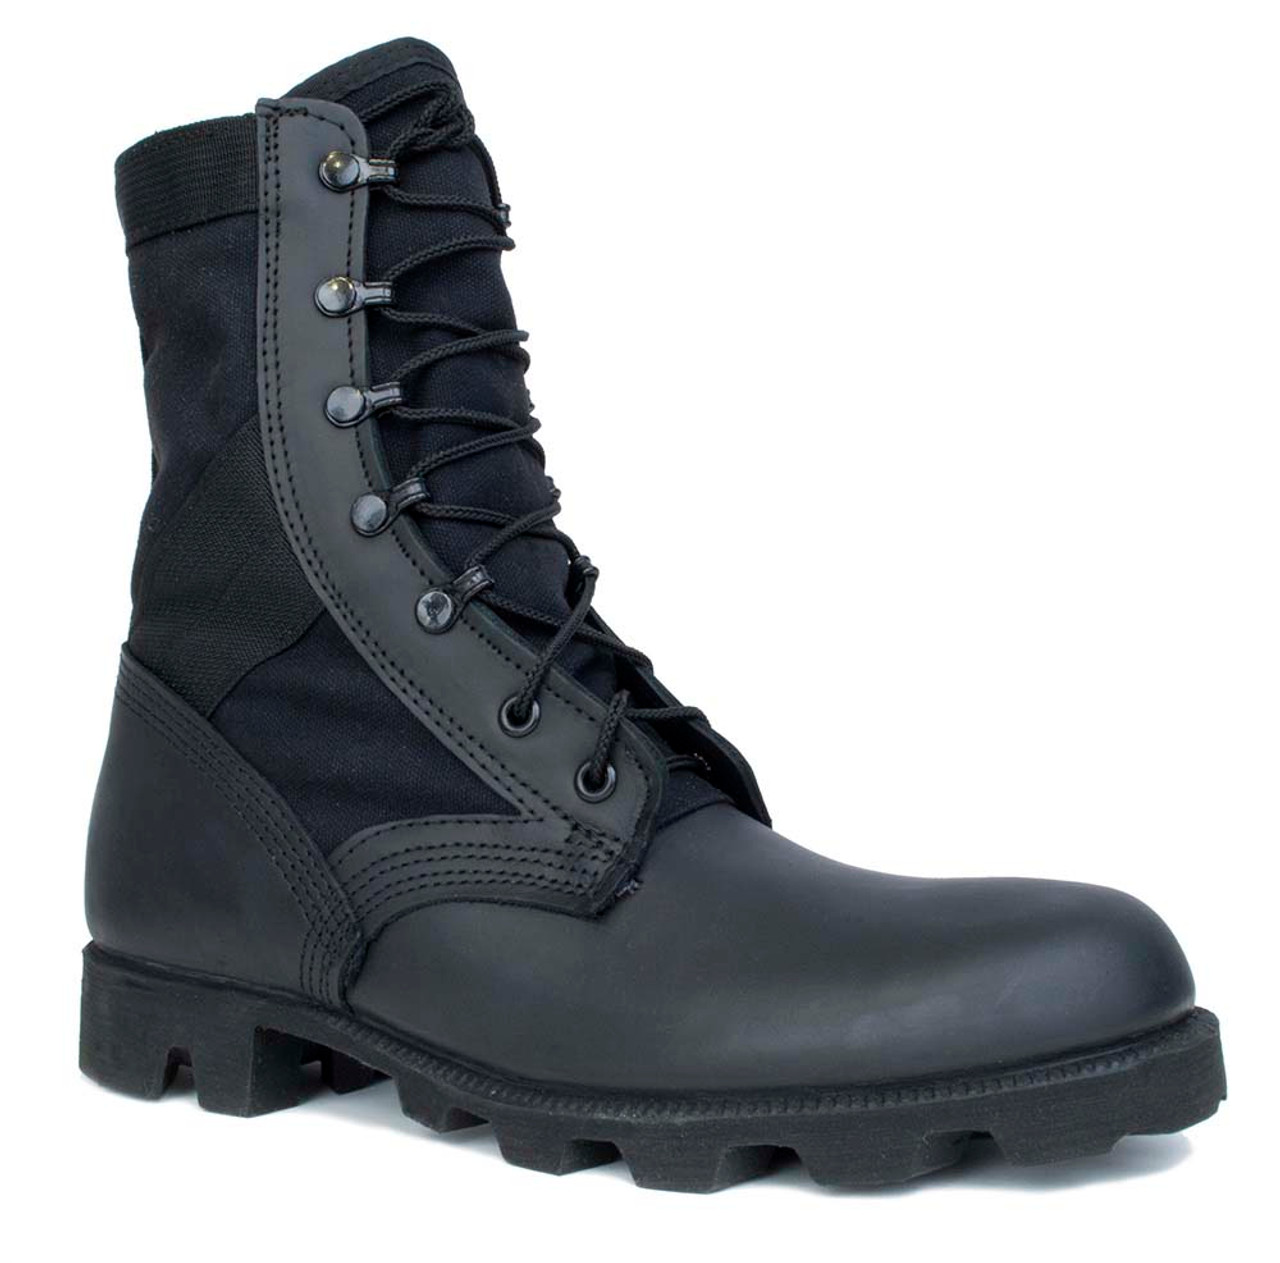 spike protective jungle boots